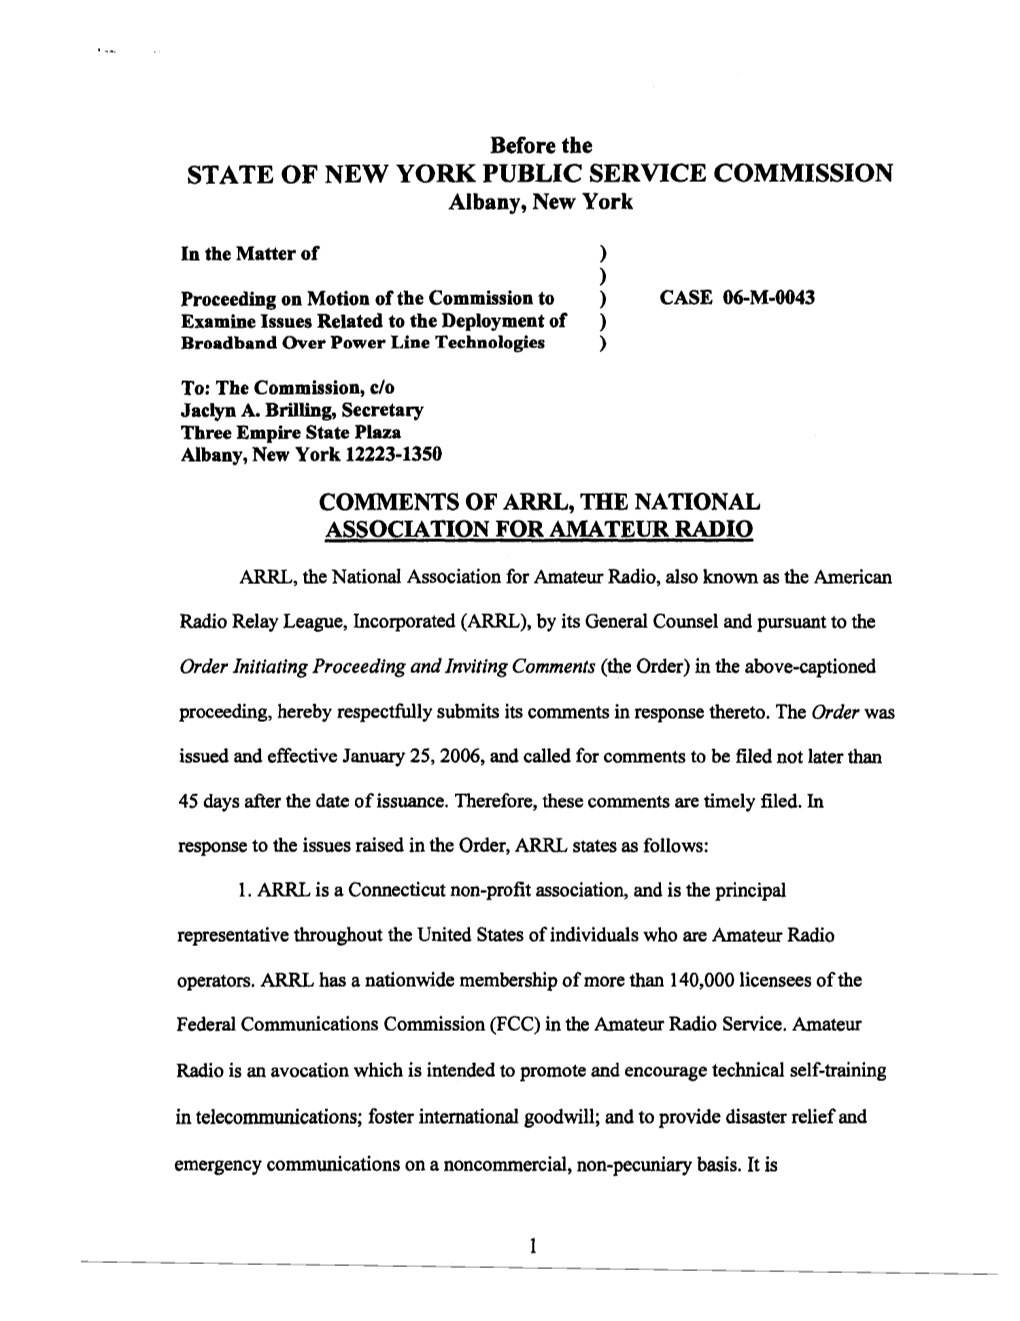 STATE of NEW YORK PUBLIC SERVICE COMMISSION Albany, New York